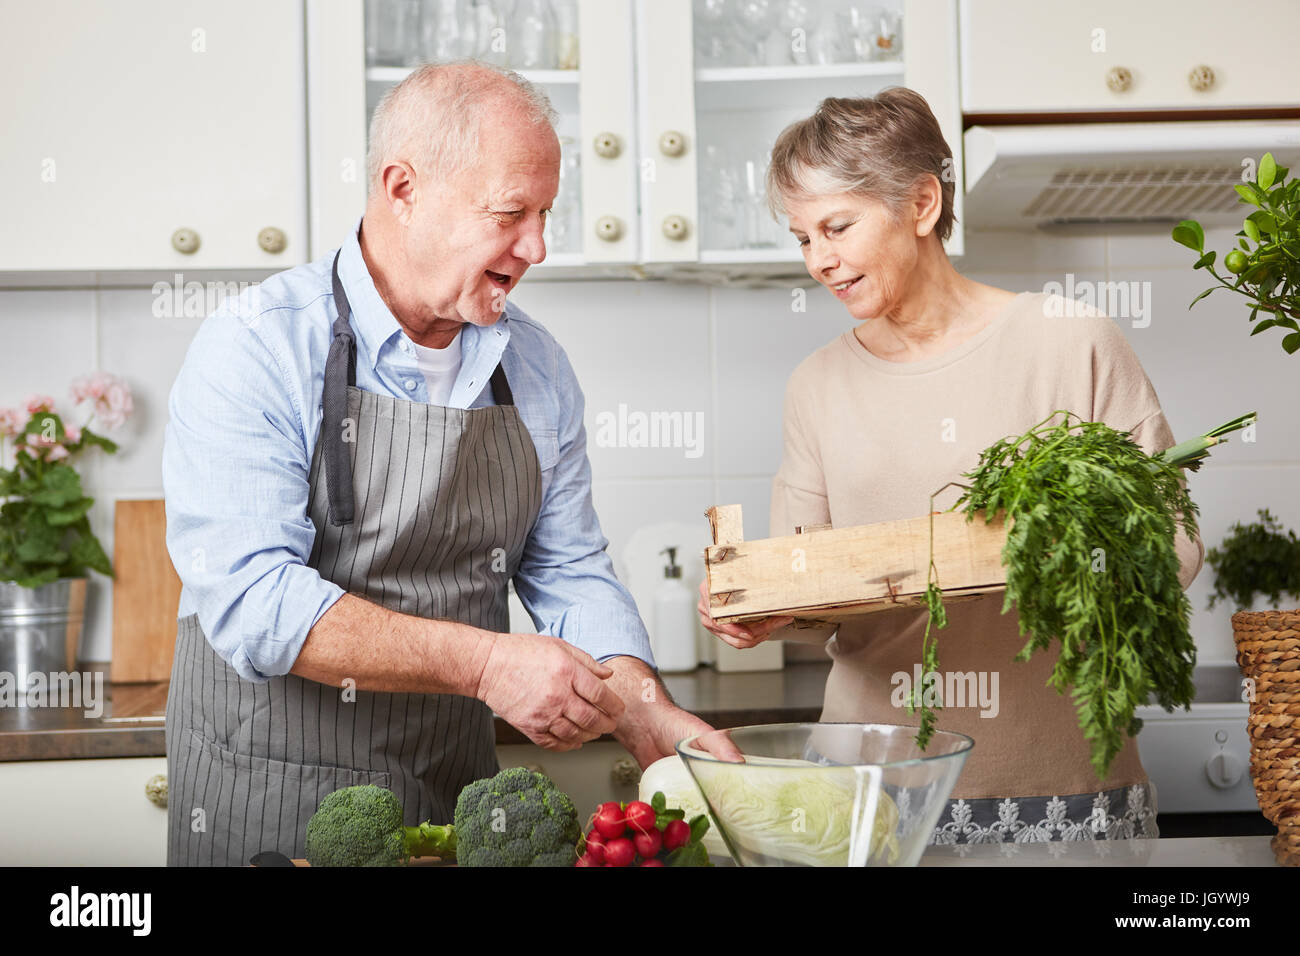 Senior couple cooking healthy food in the kitchen Stock Photo